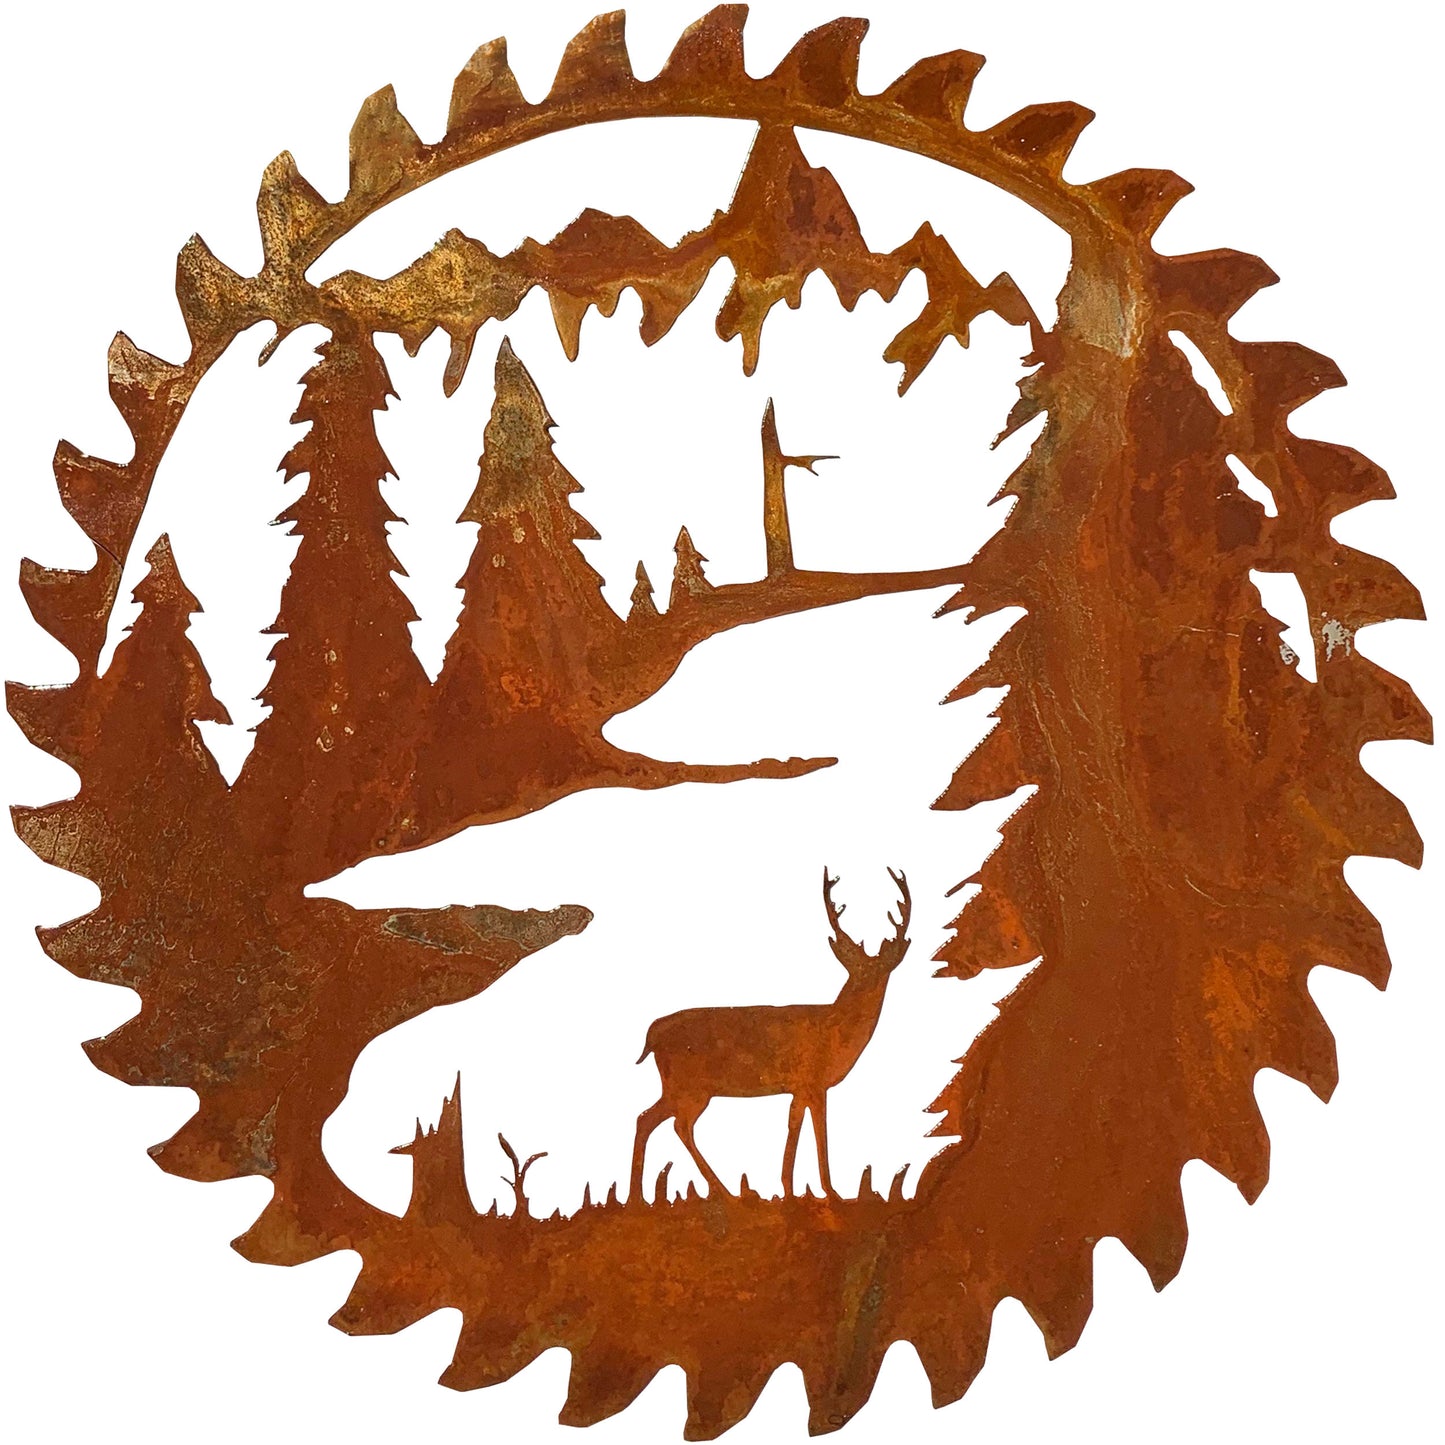 This rust patina buzz saw replica has a scene of a whitetail deer standing among pine trees and a river in the mountins and a rust natural patina finish